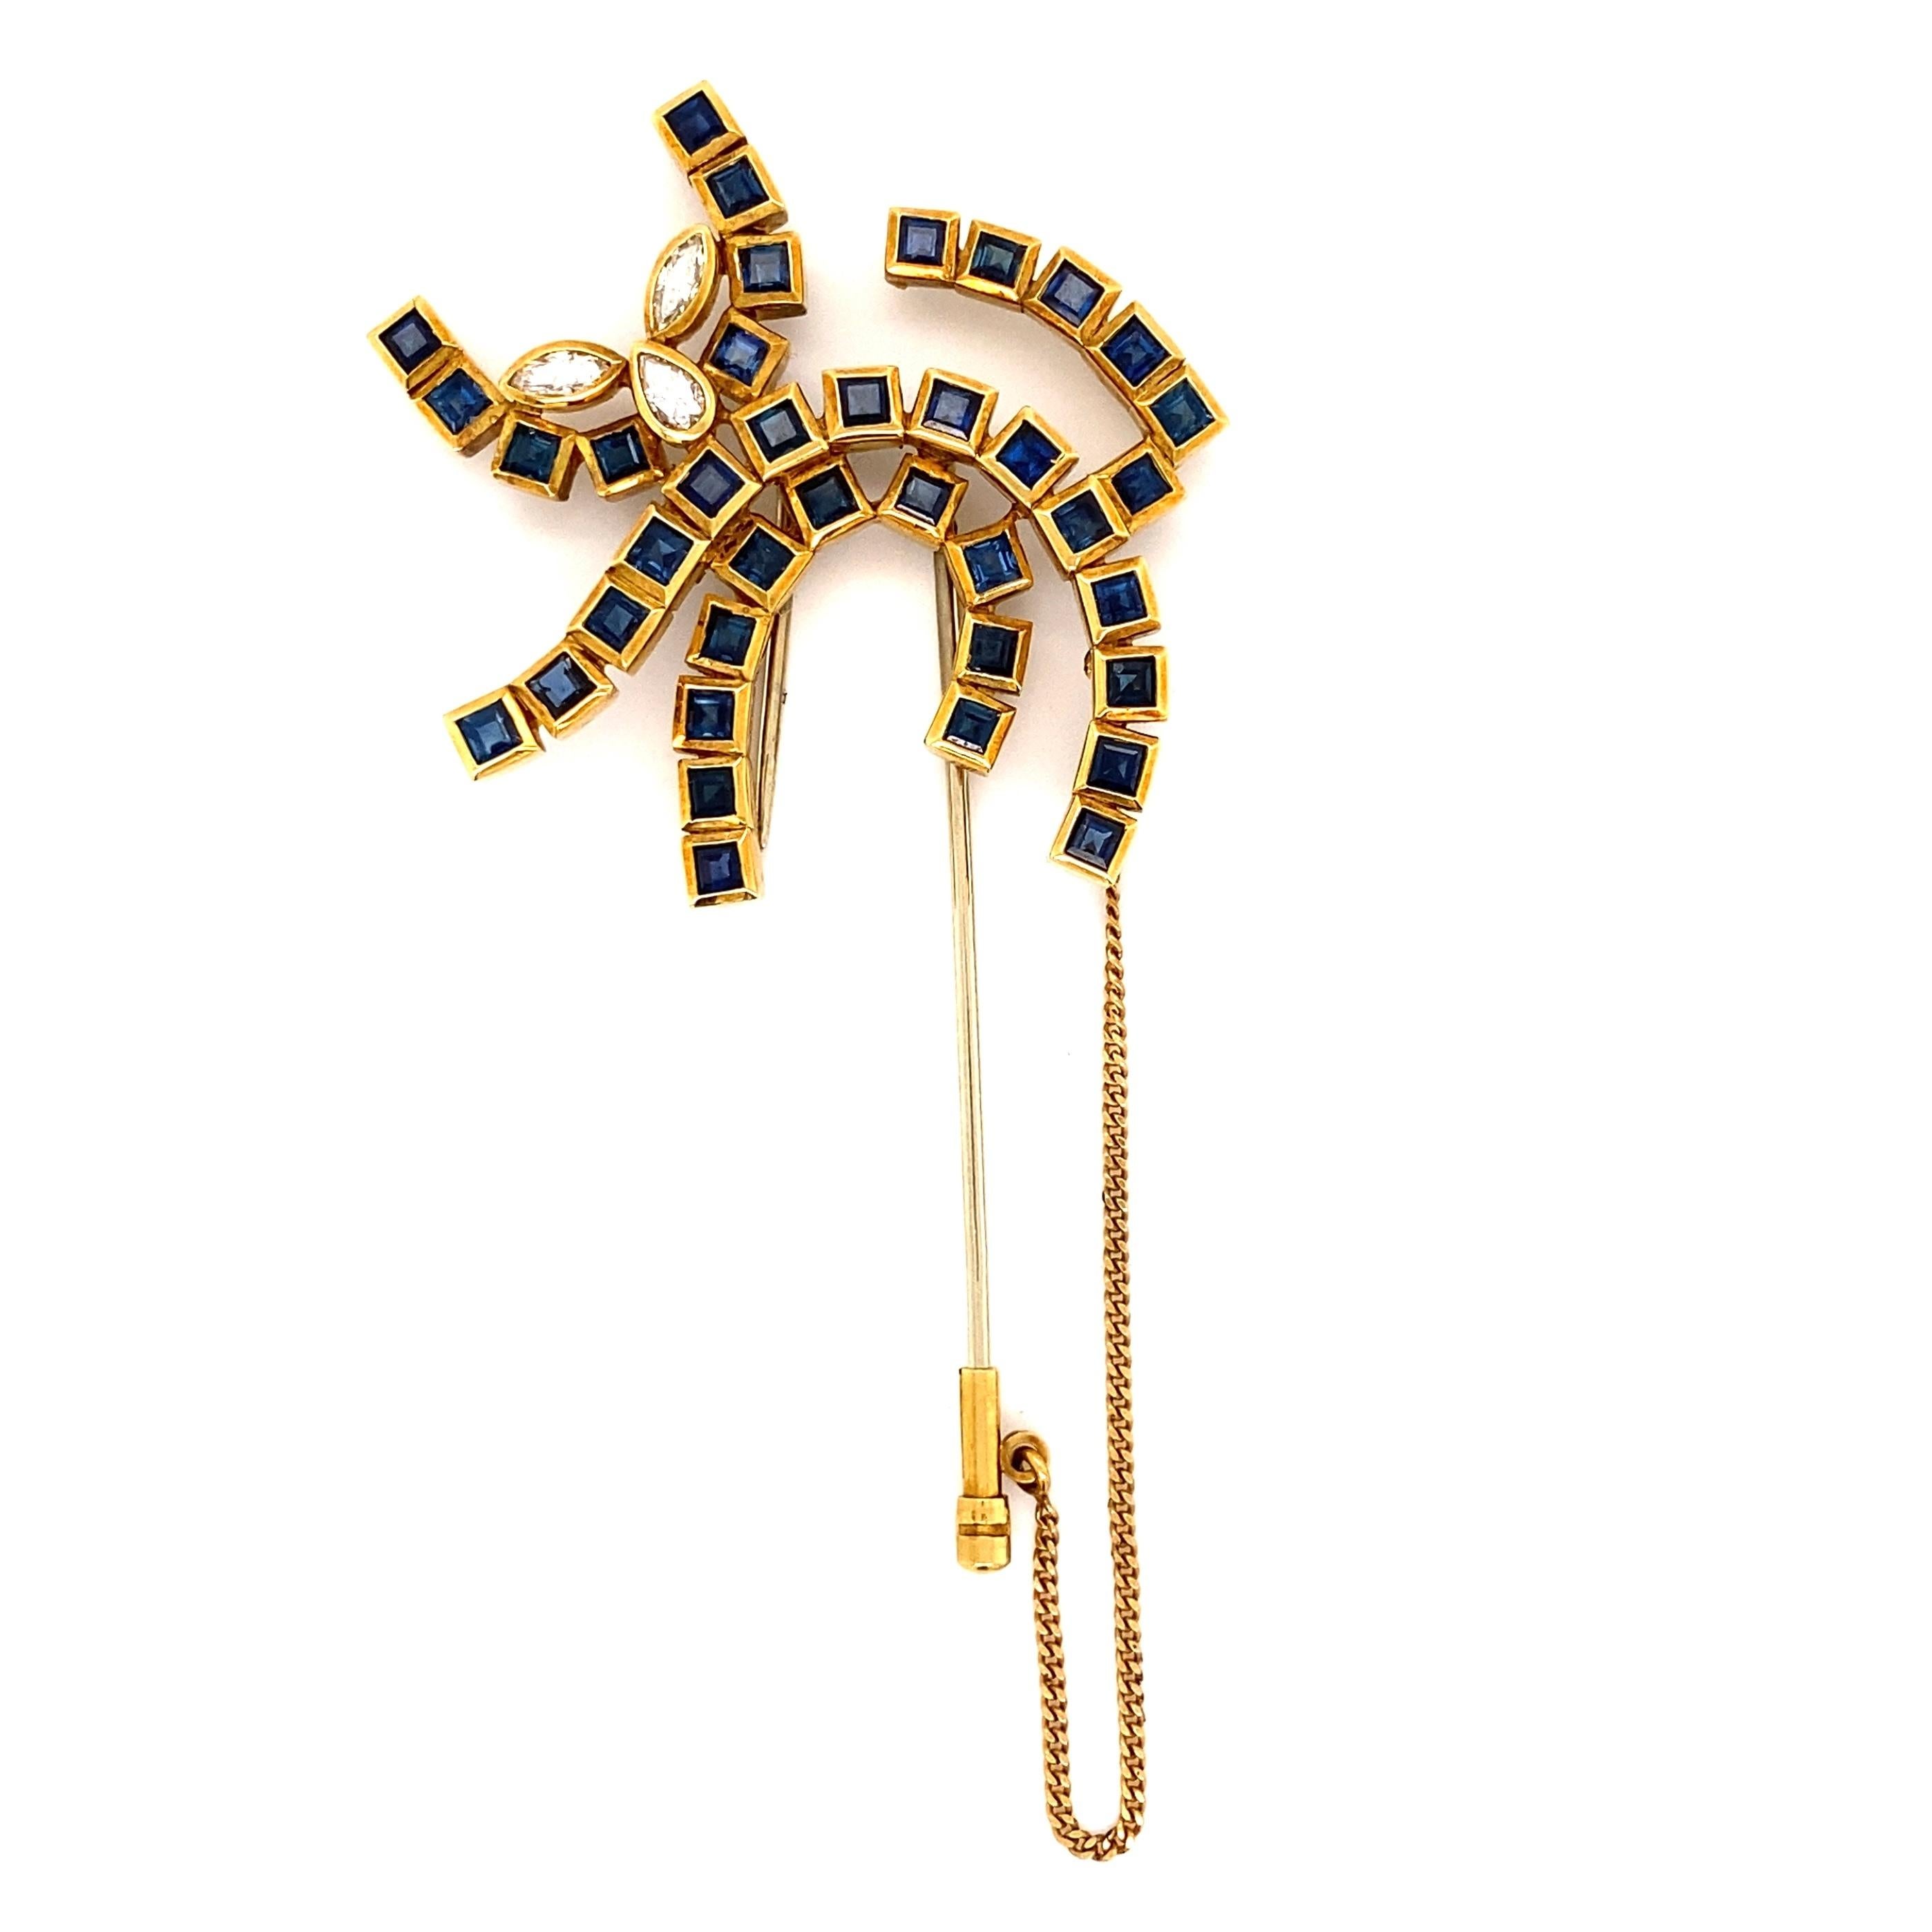 Simply Awesome! Sapphire and Diamond Stylized Cat Brooch Pin. Hand set with Sapphires, weighing approx. 6.90tcw and Diamonds approx. 0.25tcw. Beautifully Hand crafted in 18K Yellow Gold. Measuring approx. 3.00” long x 1.75” wide. In excellent